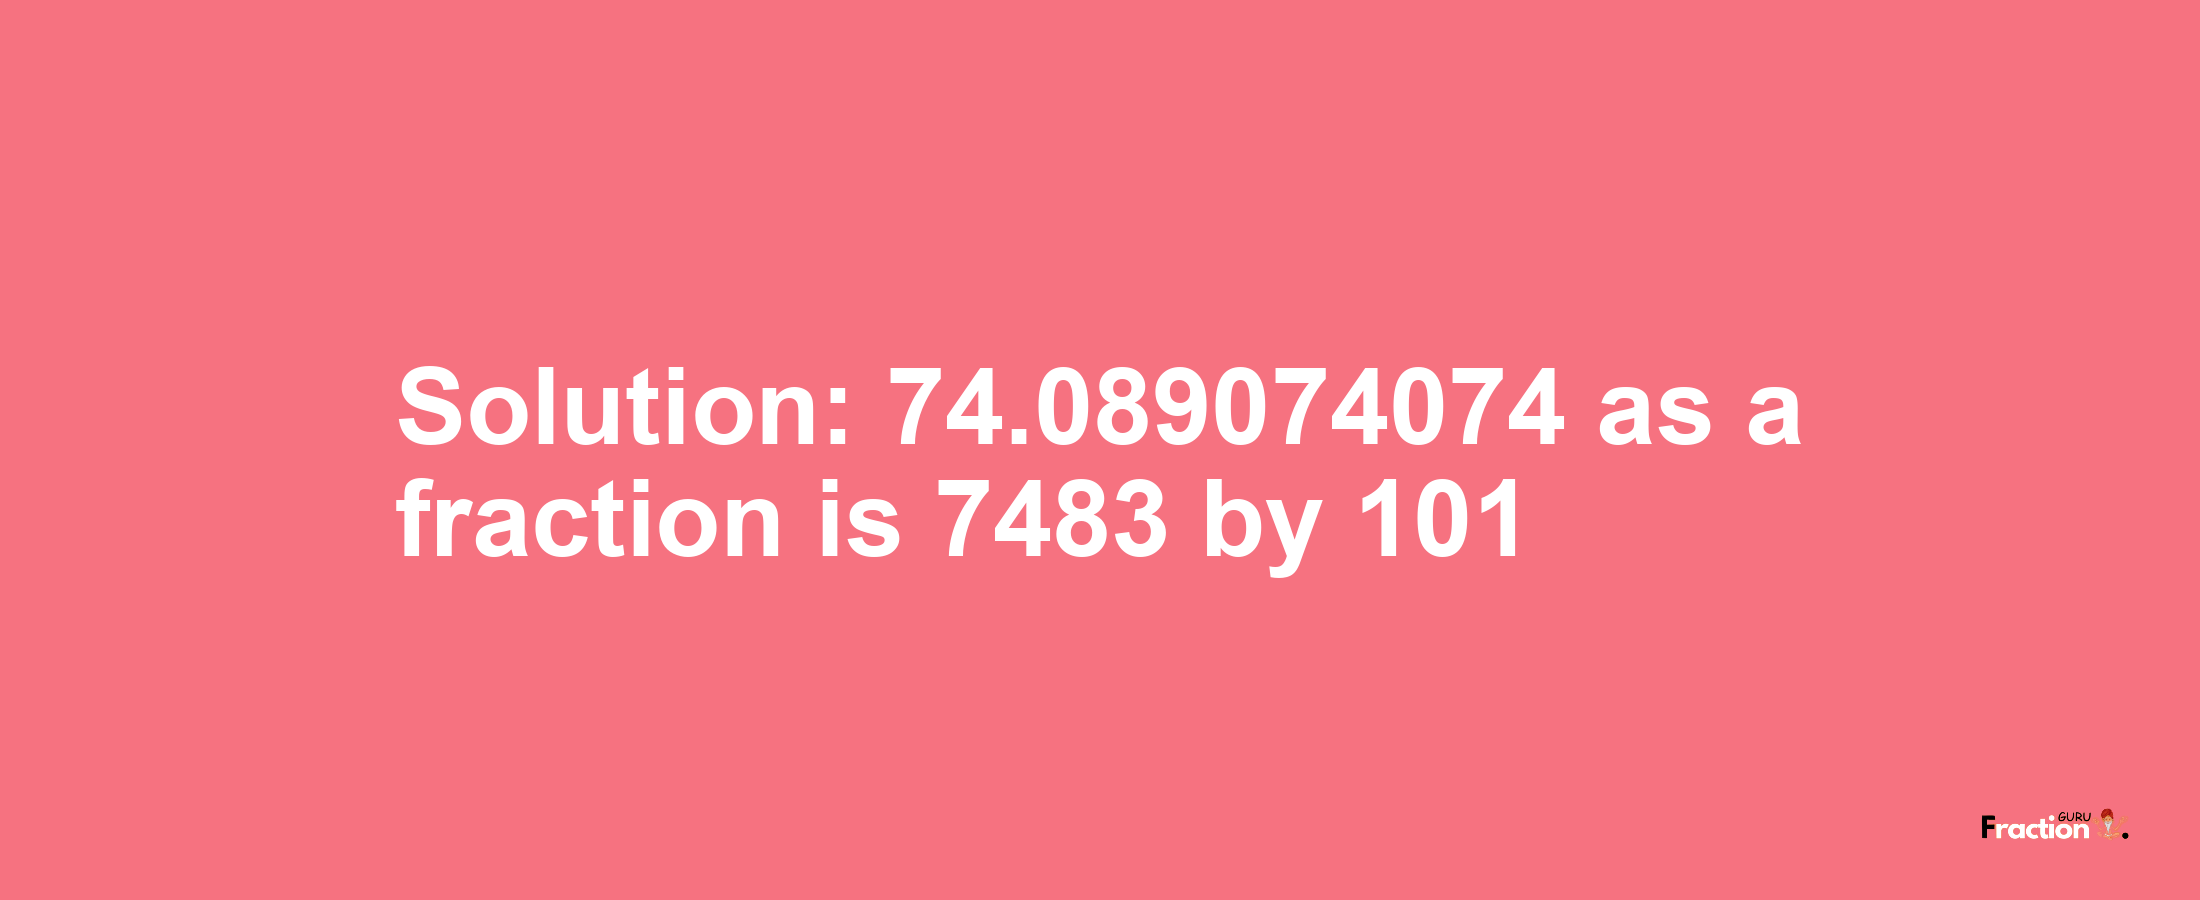 Solution:74.089074074 as a fraction is 7483/101